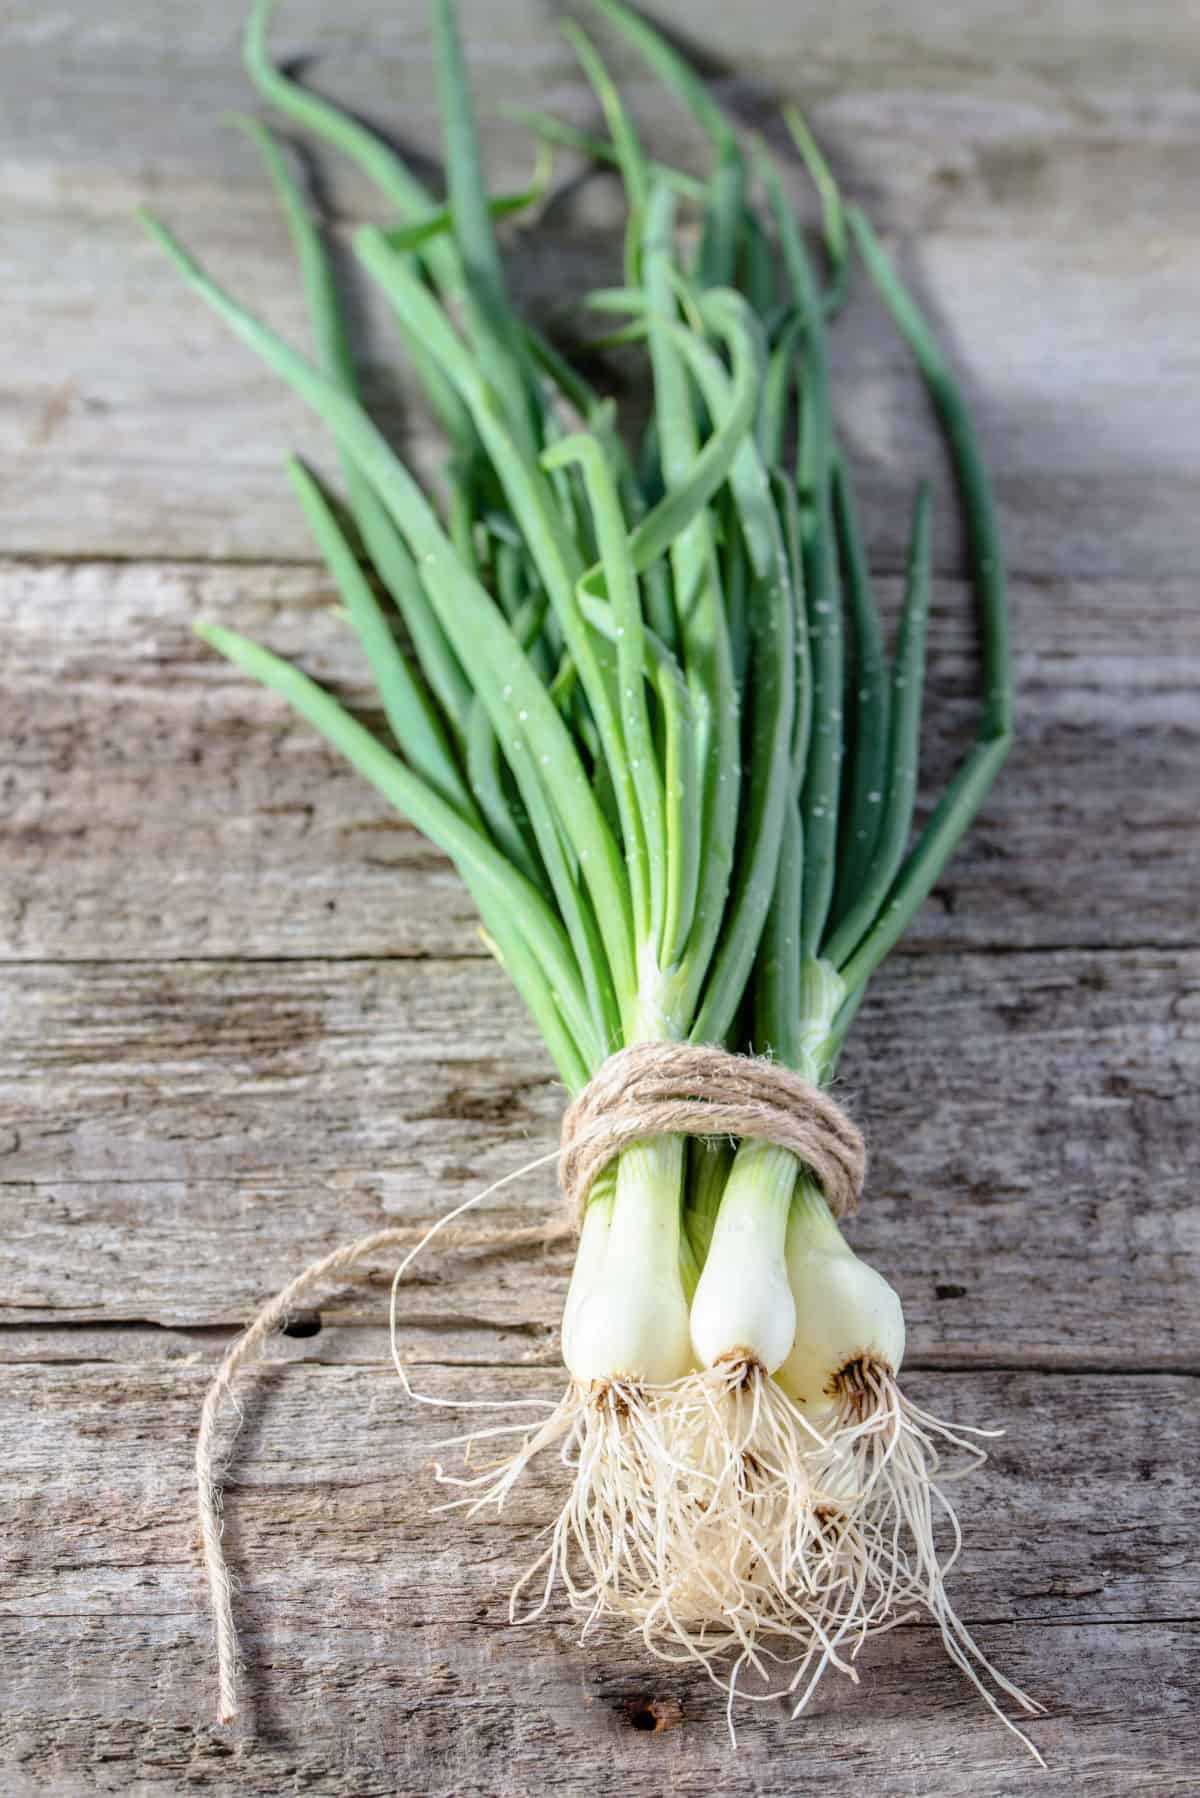 Bunch of green onion on wooden table